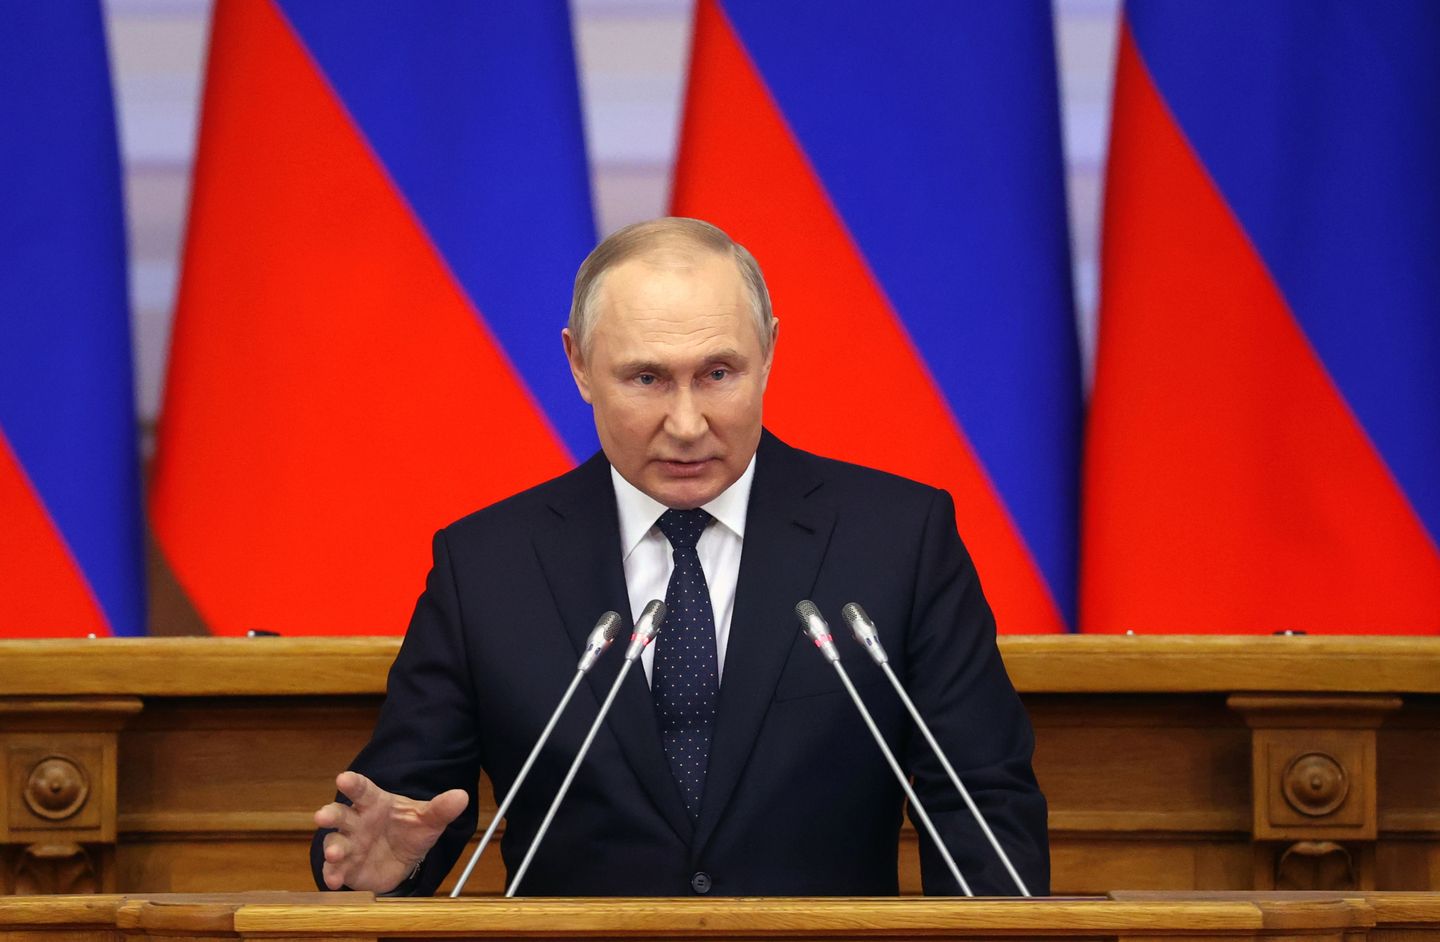 Angry Putin wields energy, nuclear threats against West